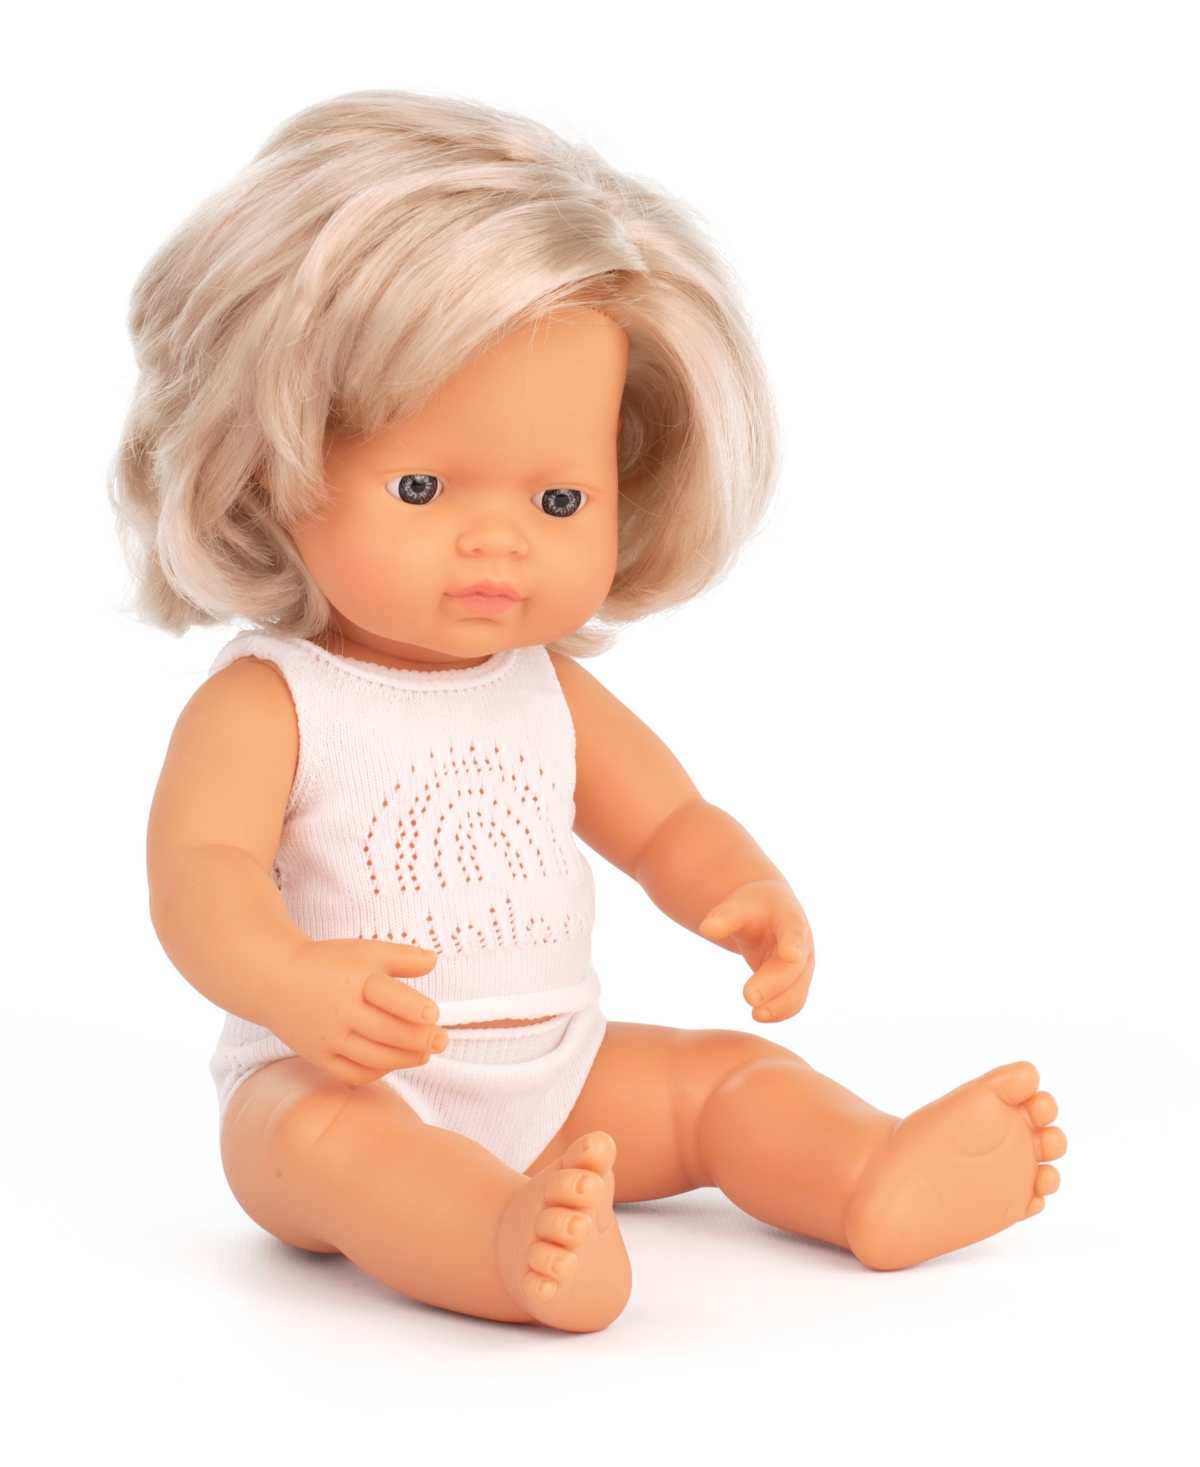 Miniland Kids' 15" Baby Doll Caucasian Blond Girl Set, 3 Piece In No Color